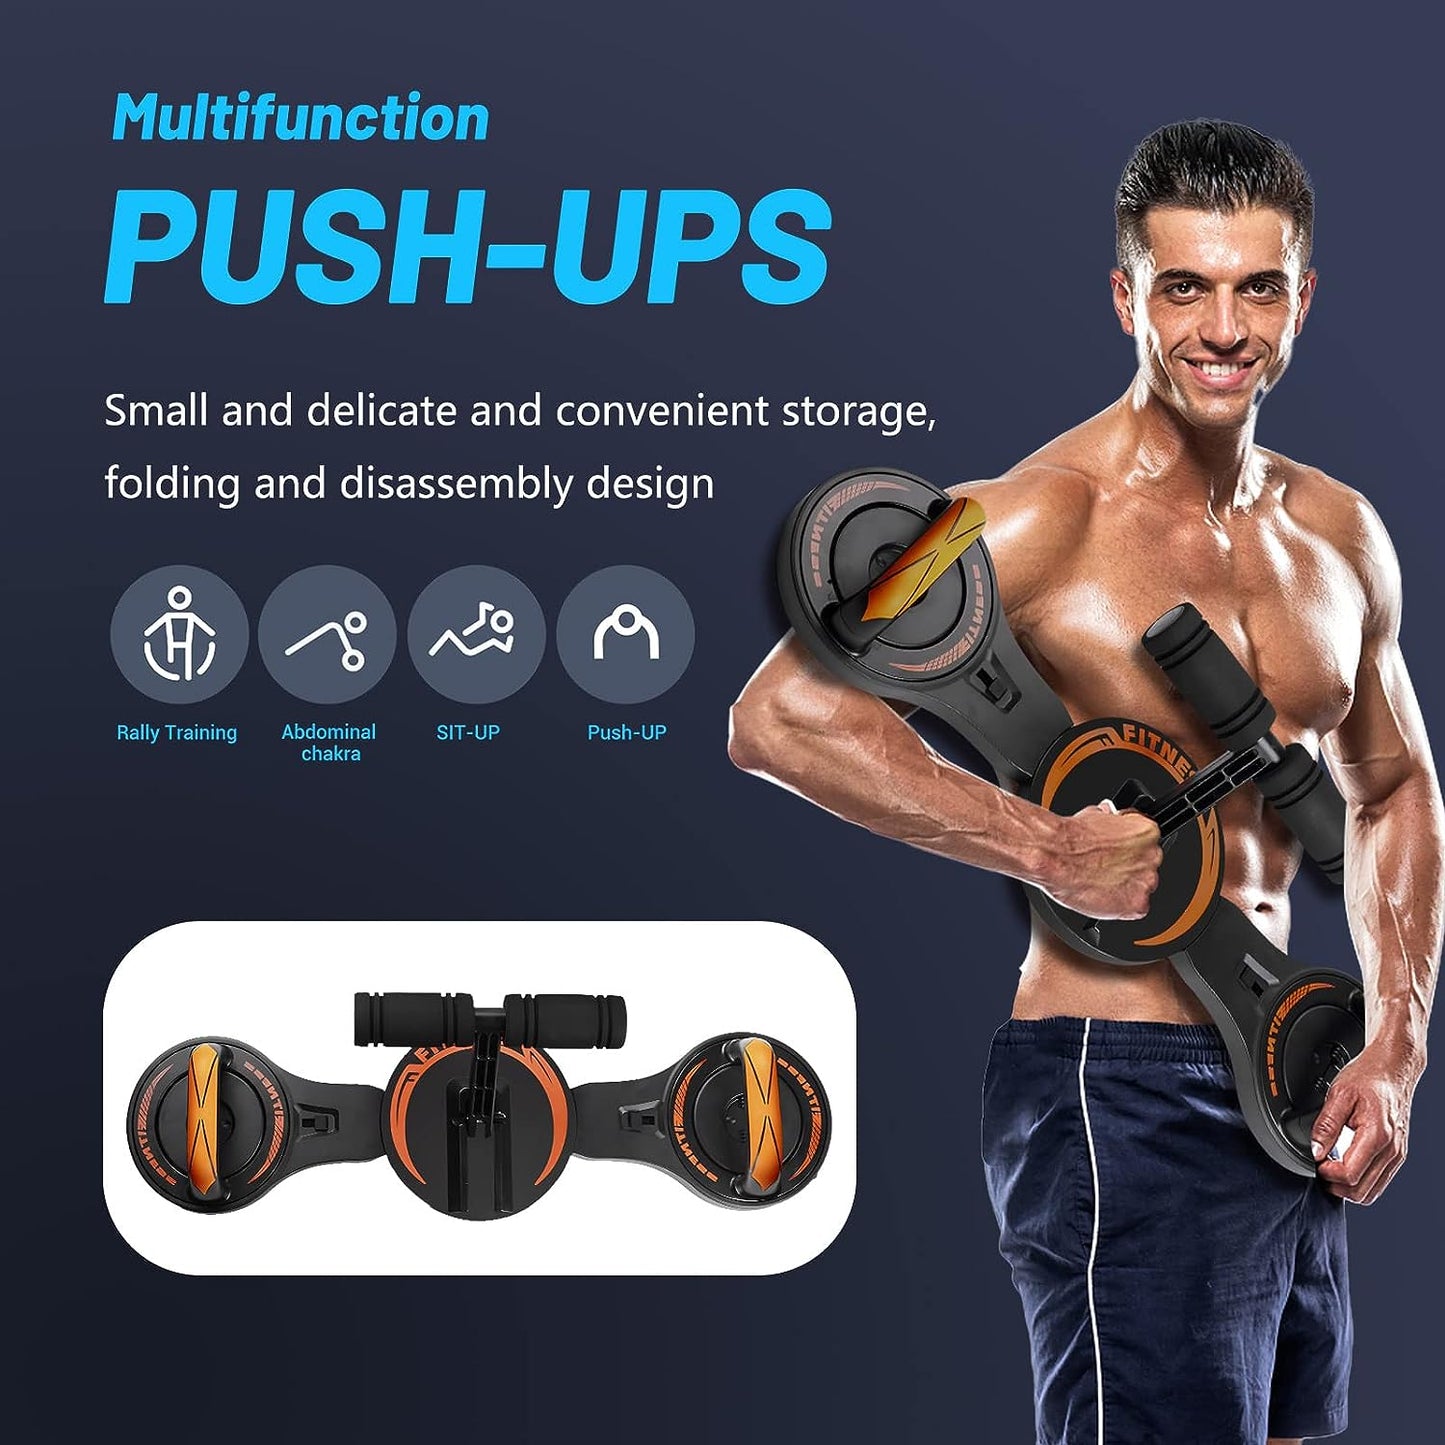 Upgraded GEEZO Push Up Board， Multi-Functional 2 in 1 Push Up Bar with Resistance Bands, Portable Home Gym, Strength Training Equipment for Perfect Pushups, Home Fitness for Men and Women (UP Black)